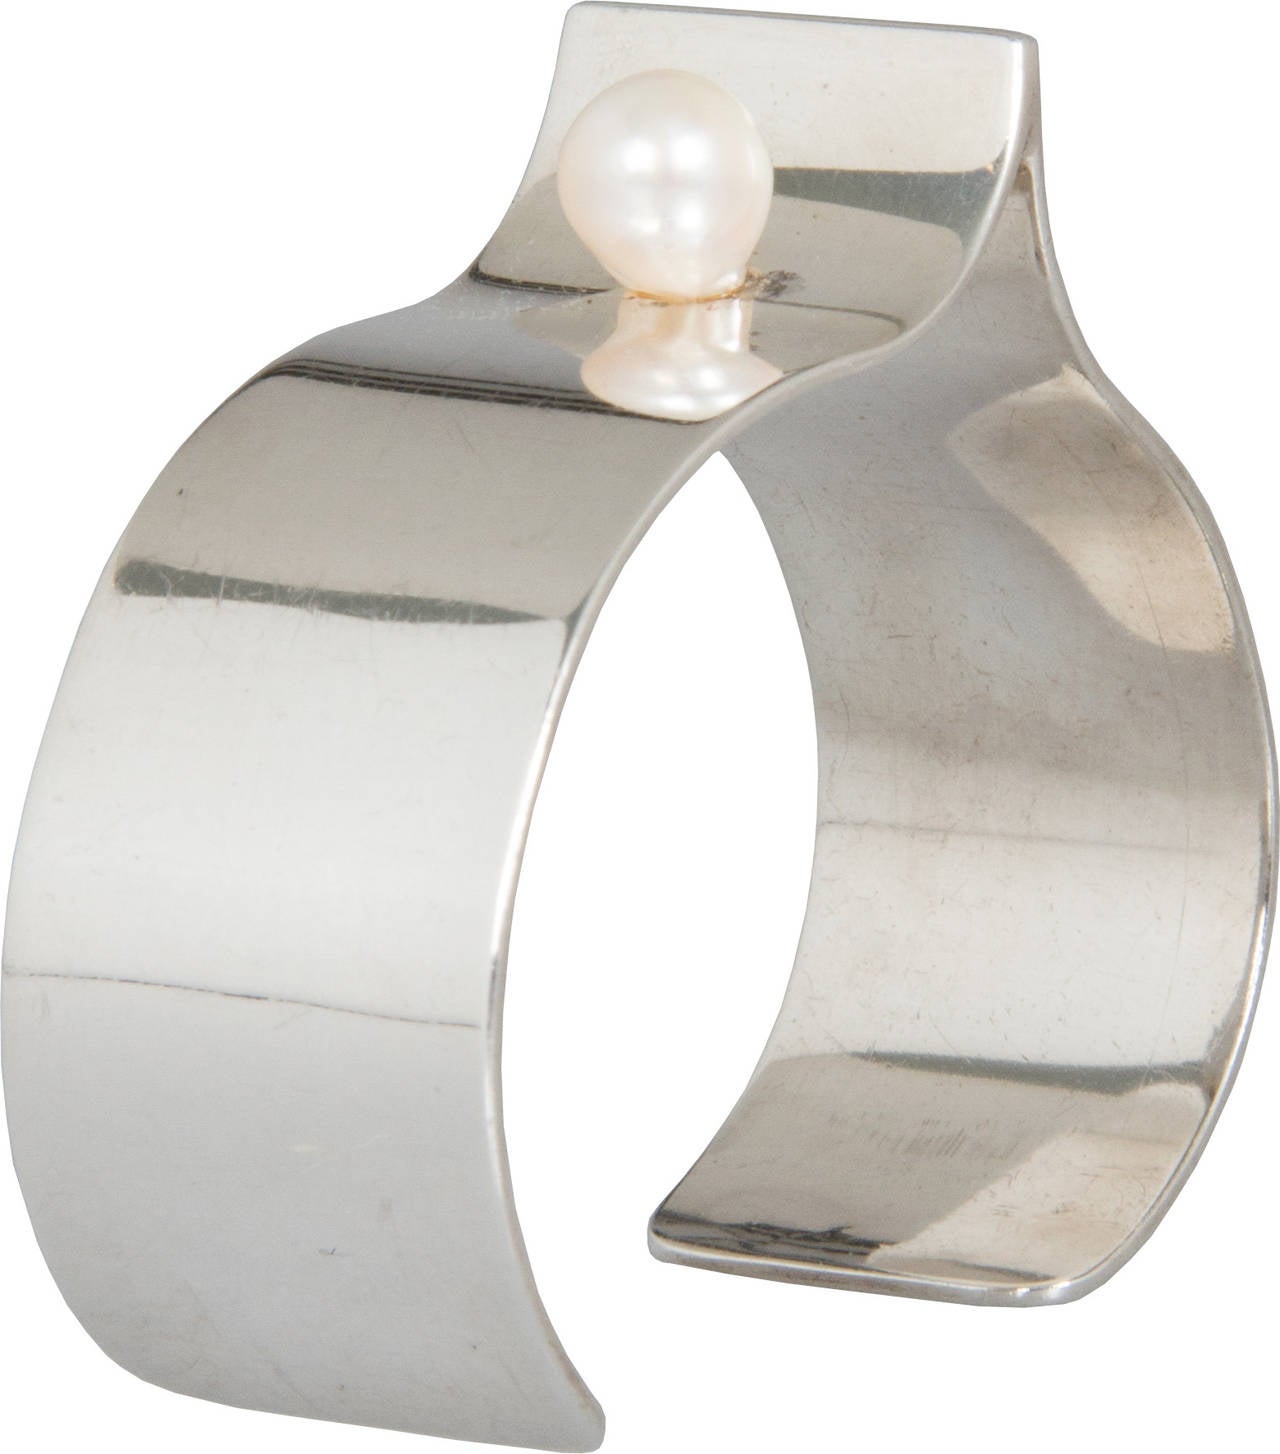 This is a great looking bracelet and easy to wear.  The interior circumference of the cuff is 6.25 inches. It was made by Bill and Patsy Roach, son and daughter inlaw of modernist jeweler Ruth Roach.